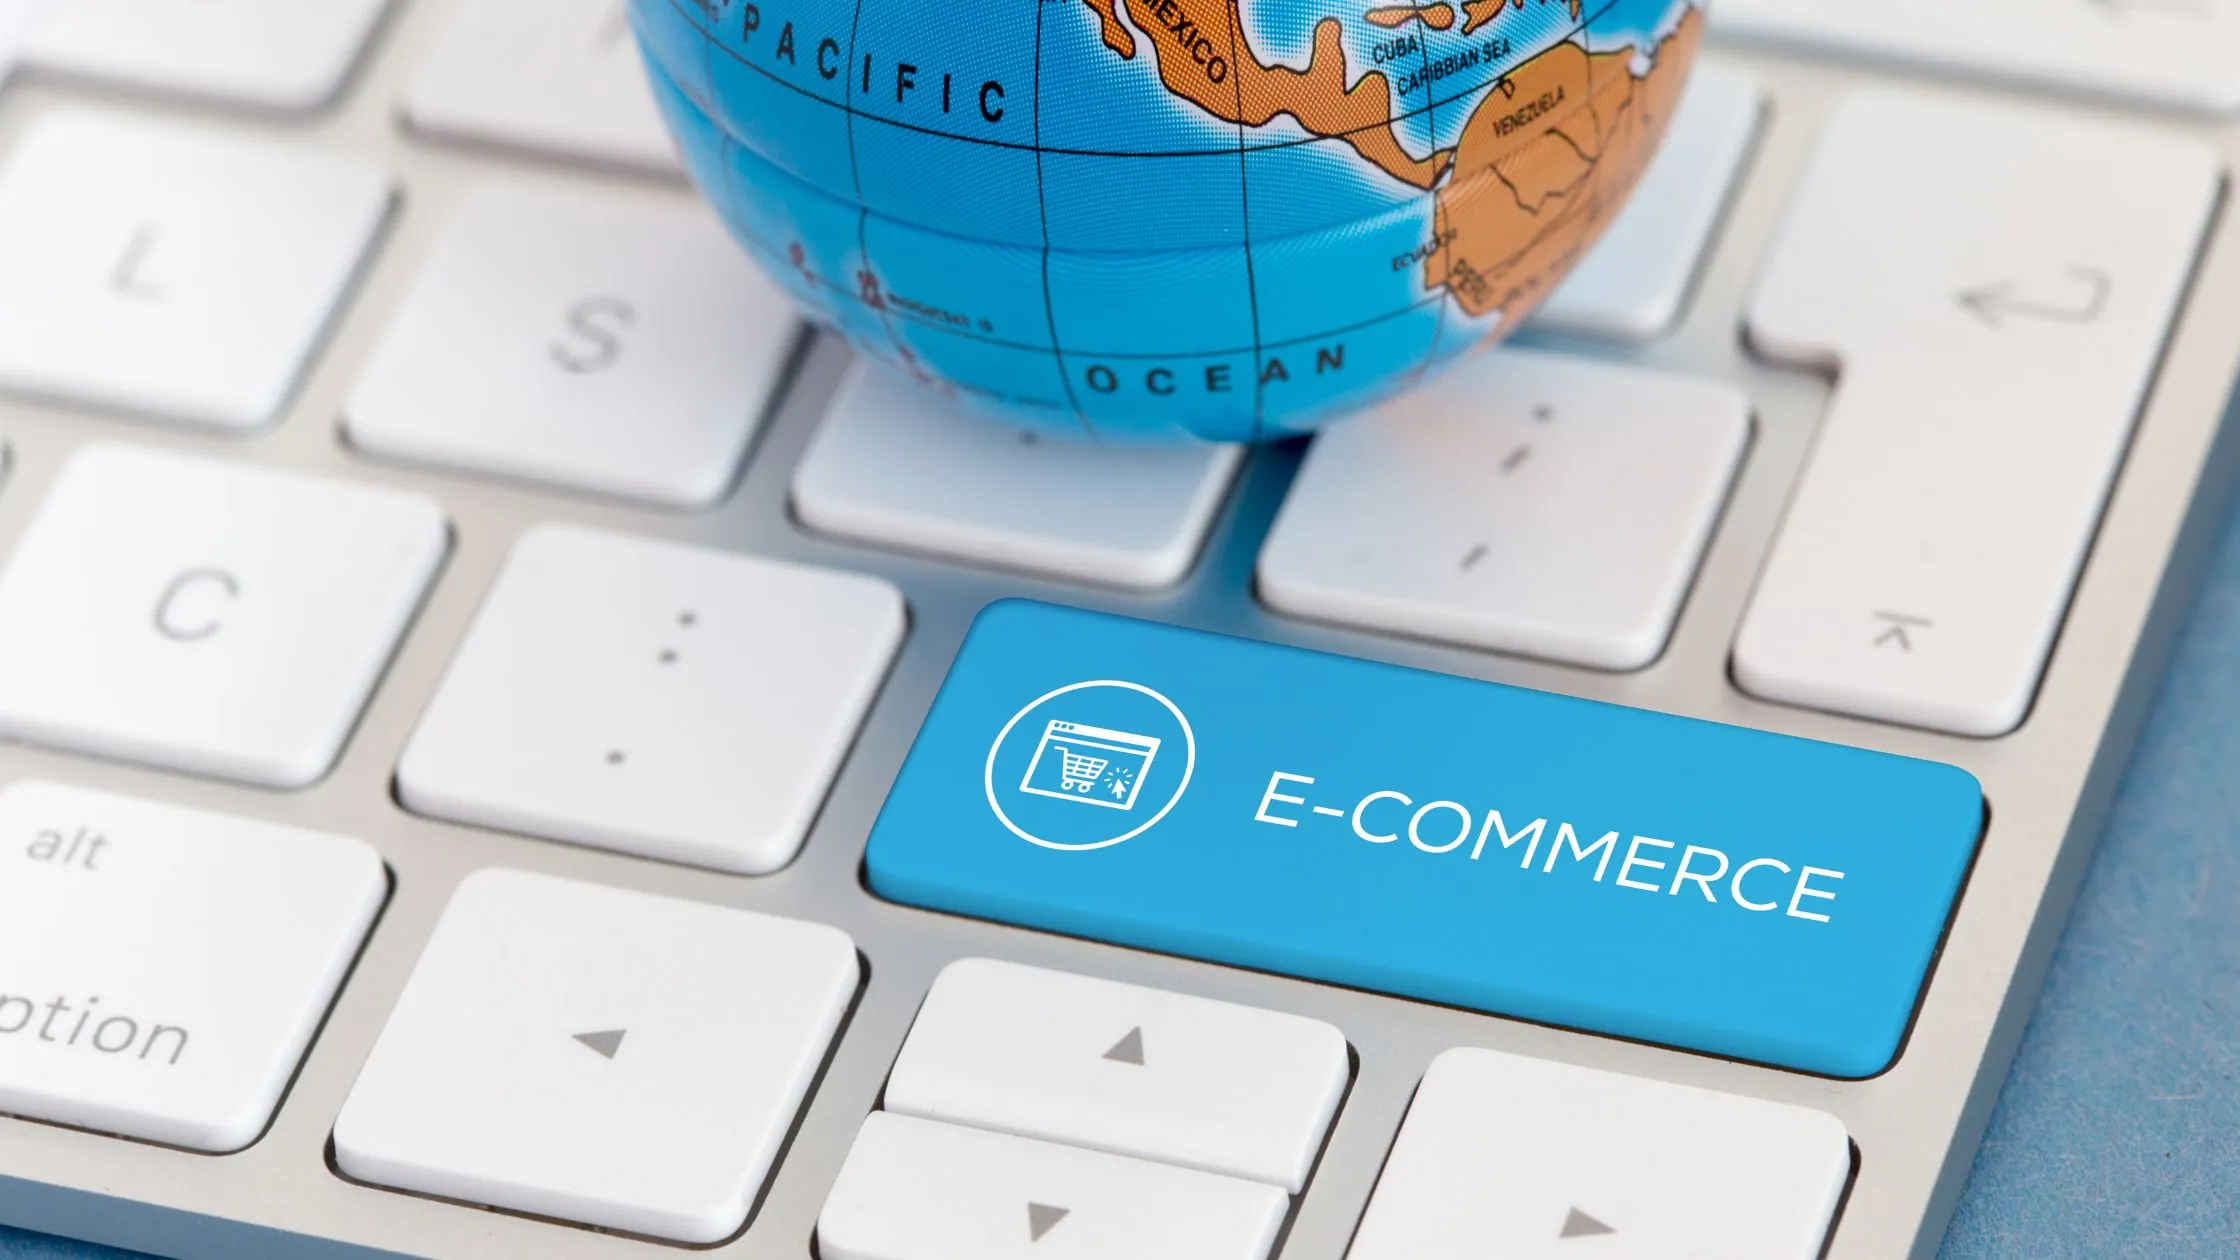 E-Commerce Customer Service Tips How to Keep Your Customers Happy